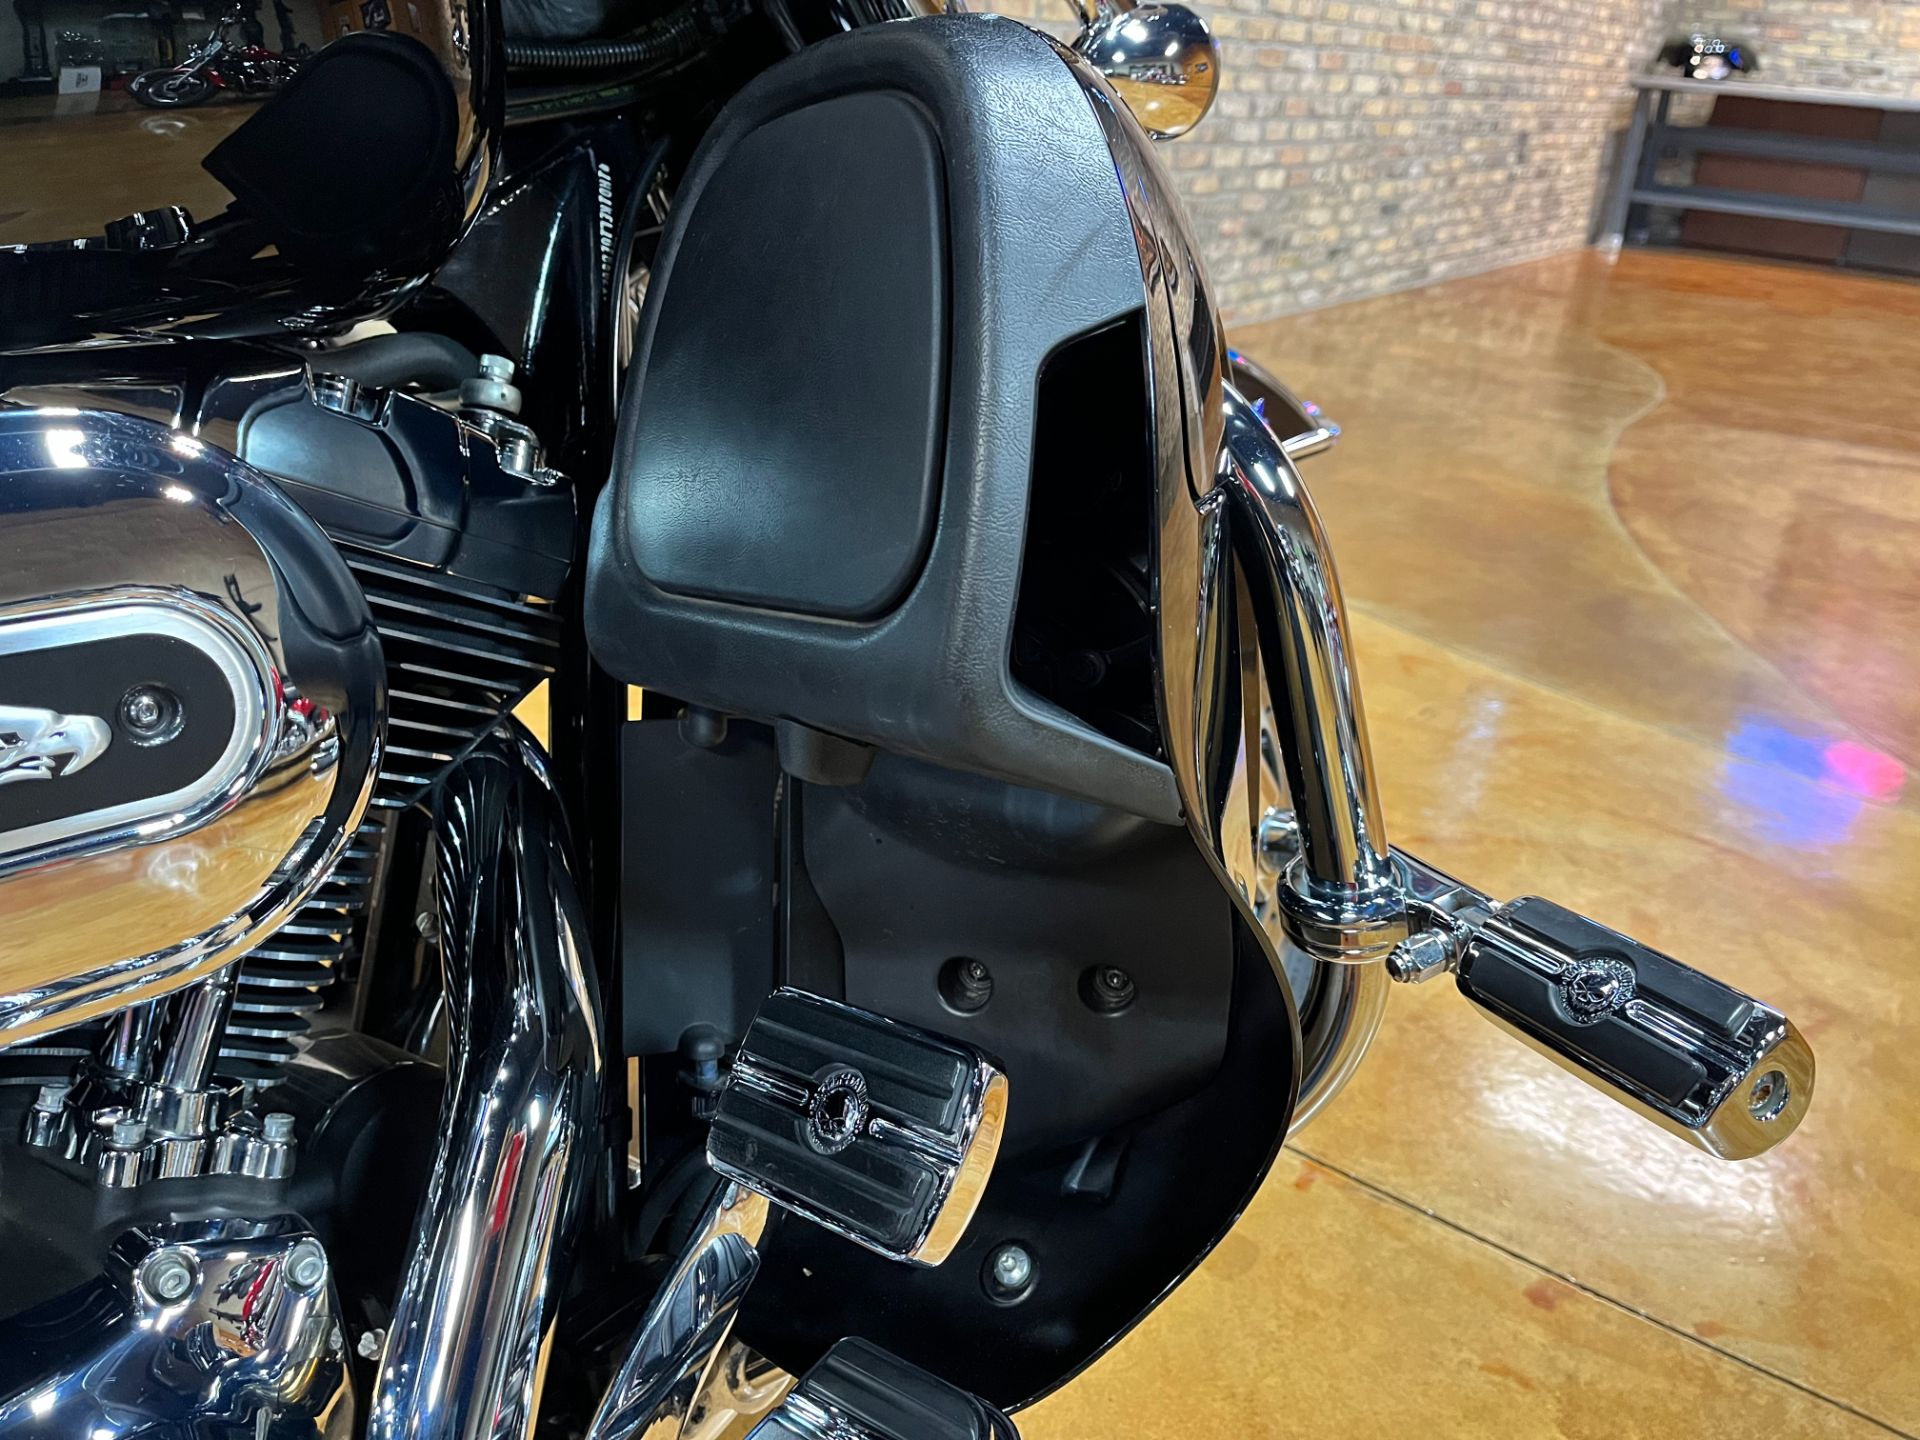 2014 Harley-Davidson Ultra Limited in Big Bend, Wisconsin - Photo 12